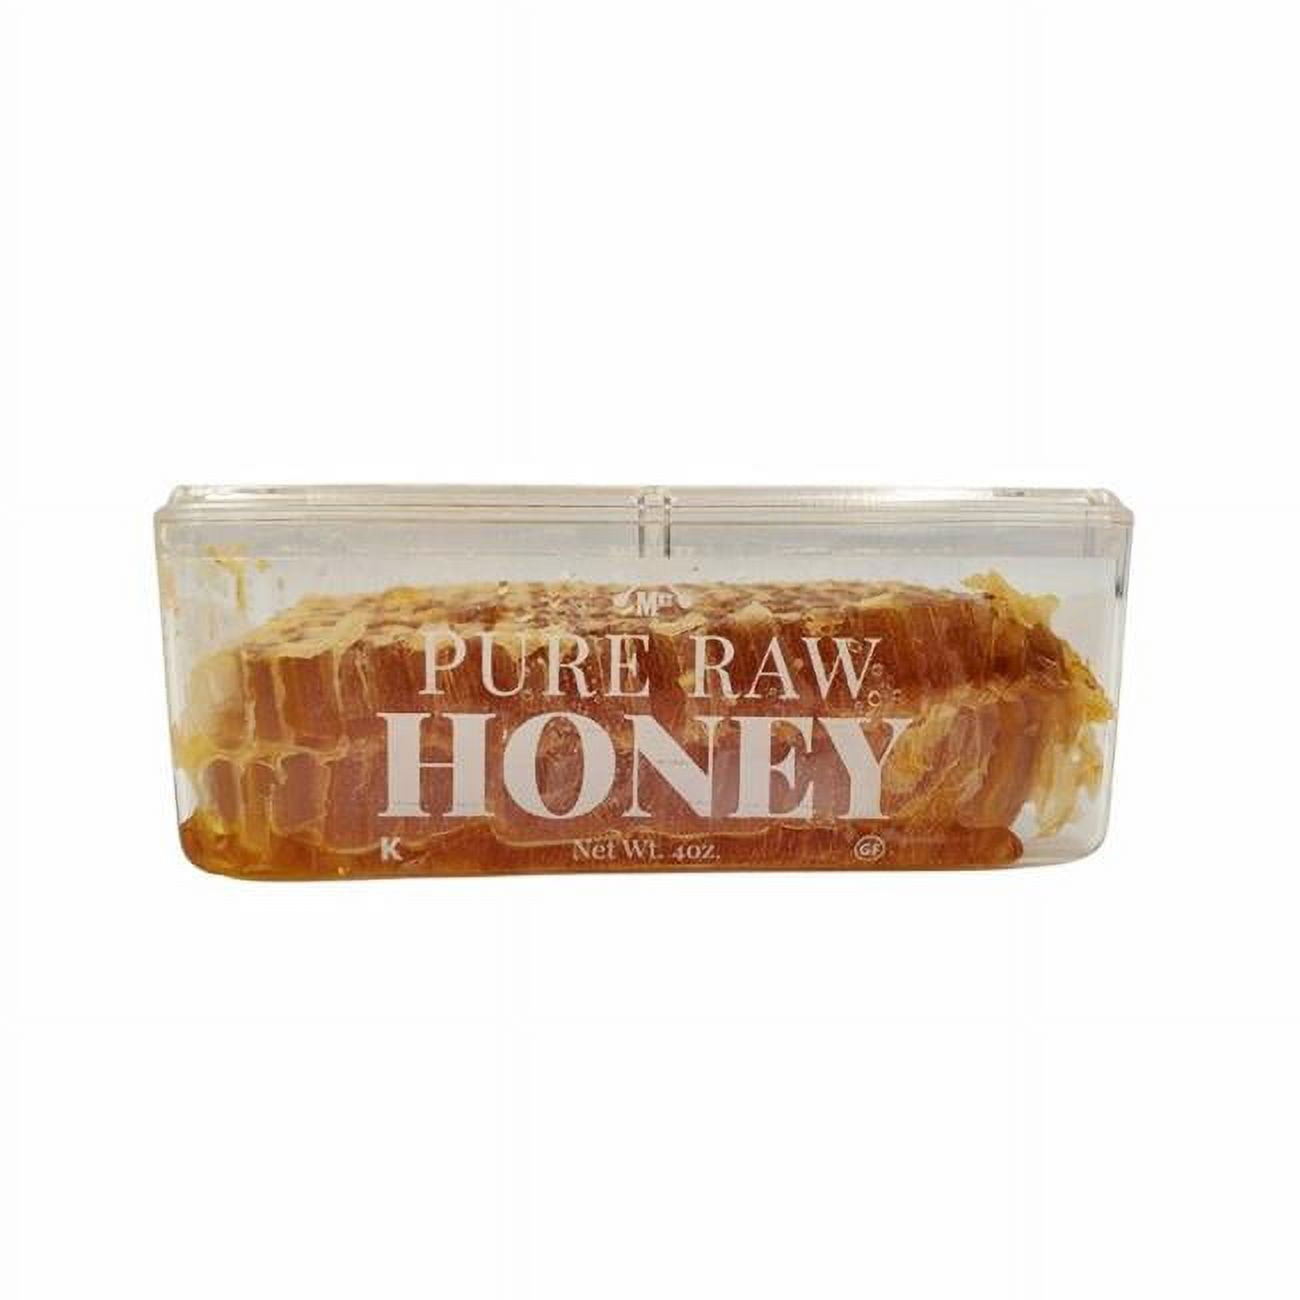 Picture of World Honey Market 6010551 4 oz Honey Comb Case - Pack of 12